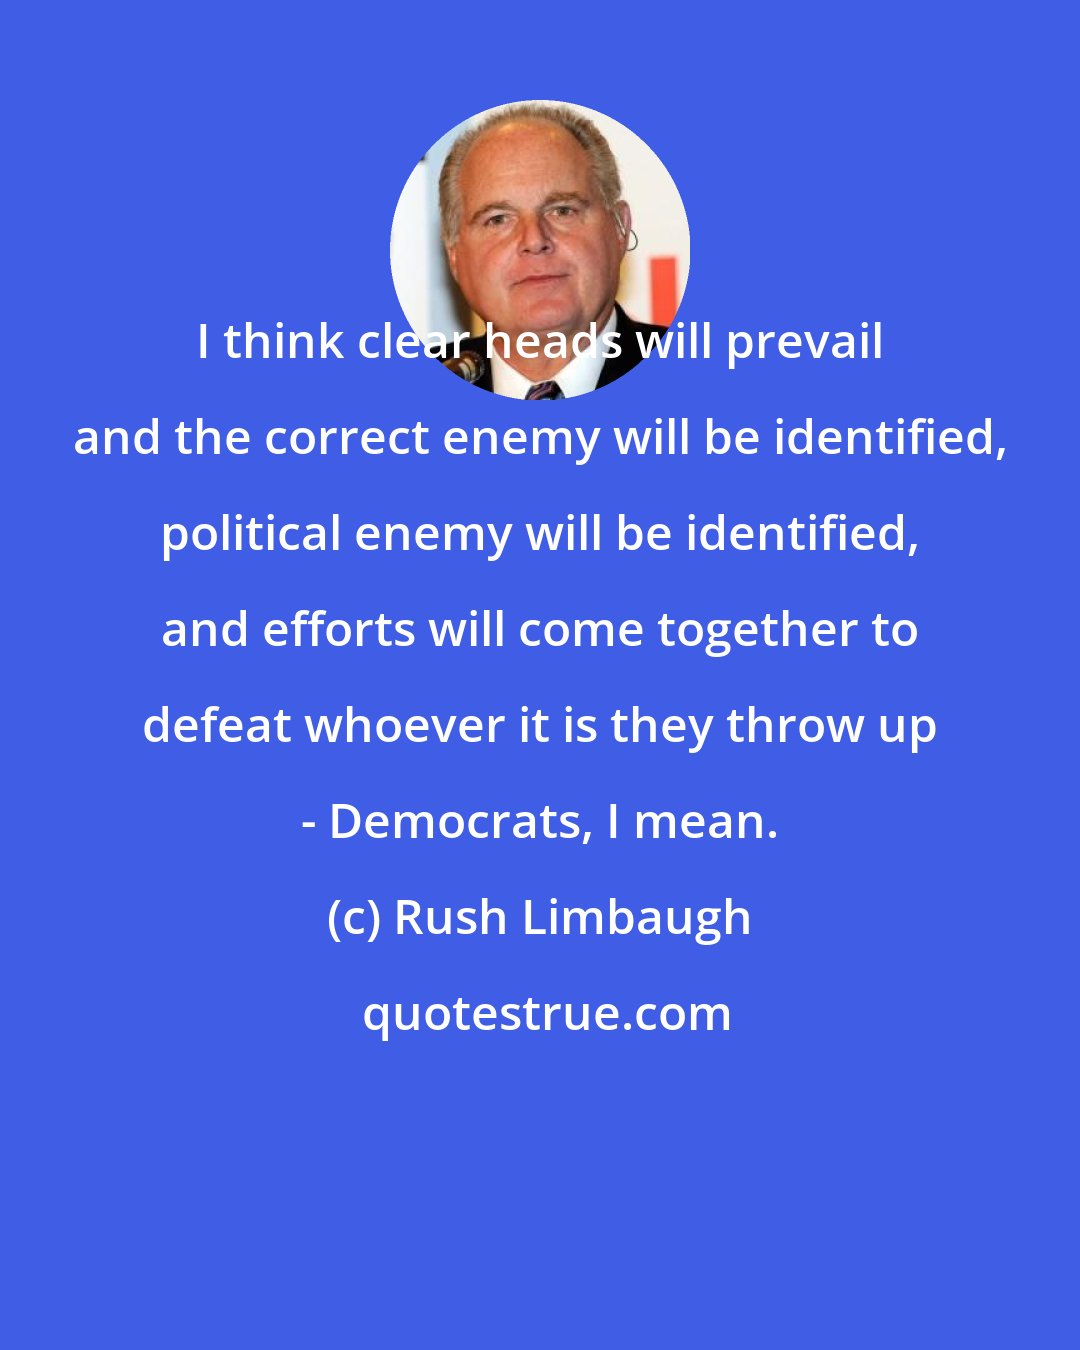 Rush Limbaugh: I think clear heads will prevail and the correct enemy will be identified, political enemy will be identified, and efforts will come together to defeat whoever it is they throw up - Democrats, I mean.